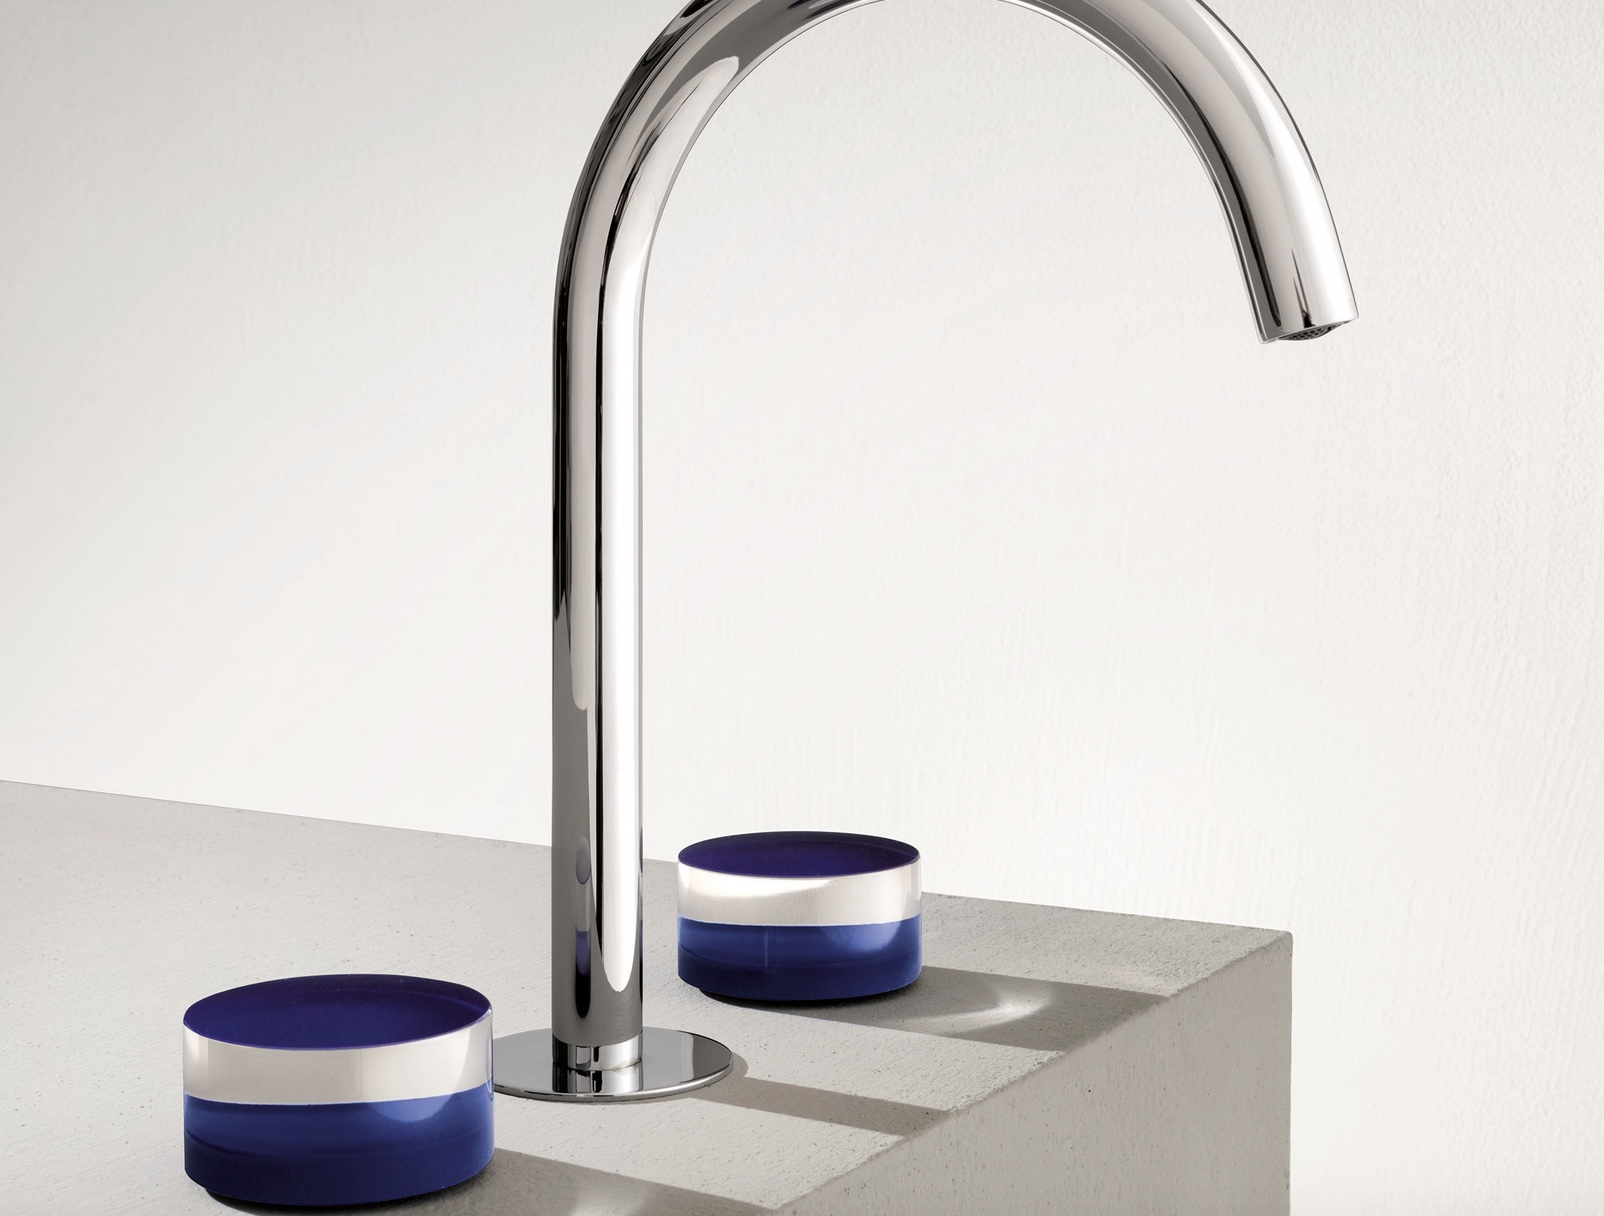 Fantini's Nice Faucet Handle blue with fitting